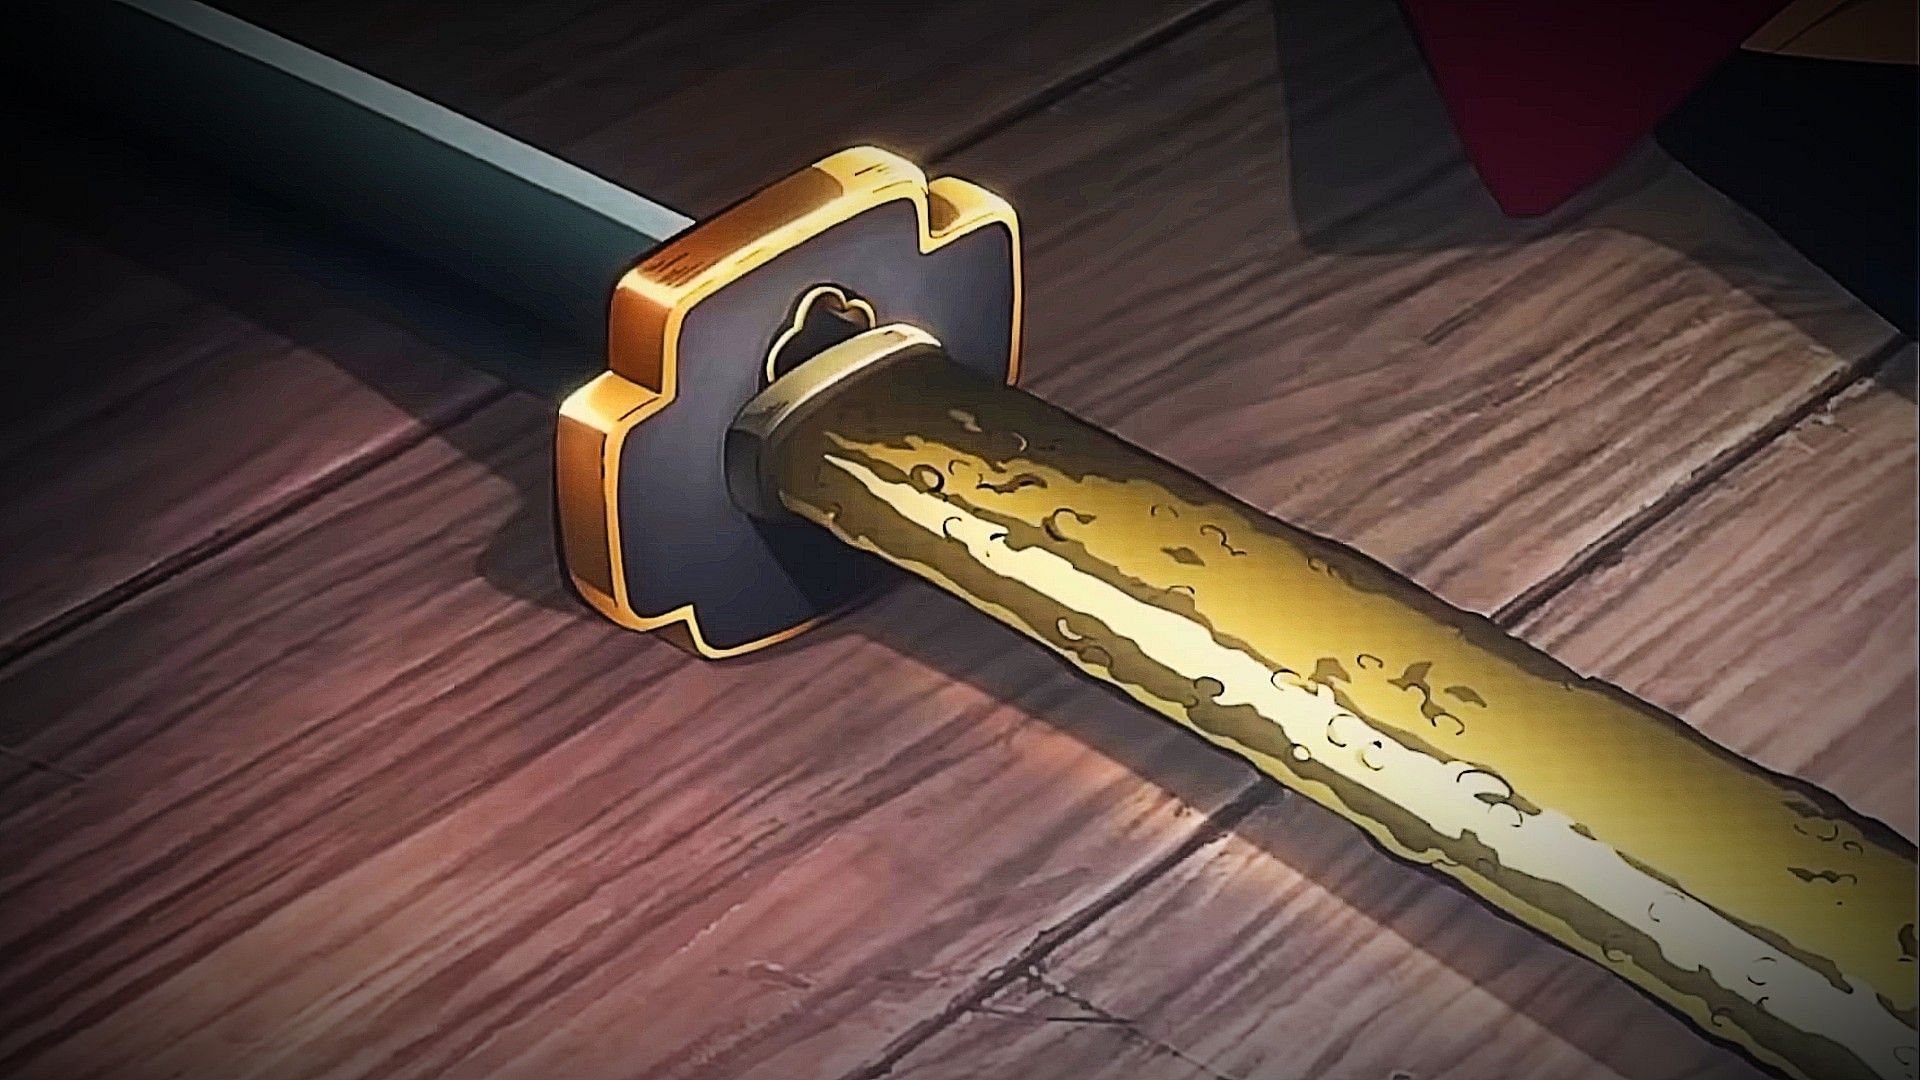 Demon Slayer Season 3 Episode 3 Review: A Sword from Over 300 Years Ago